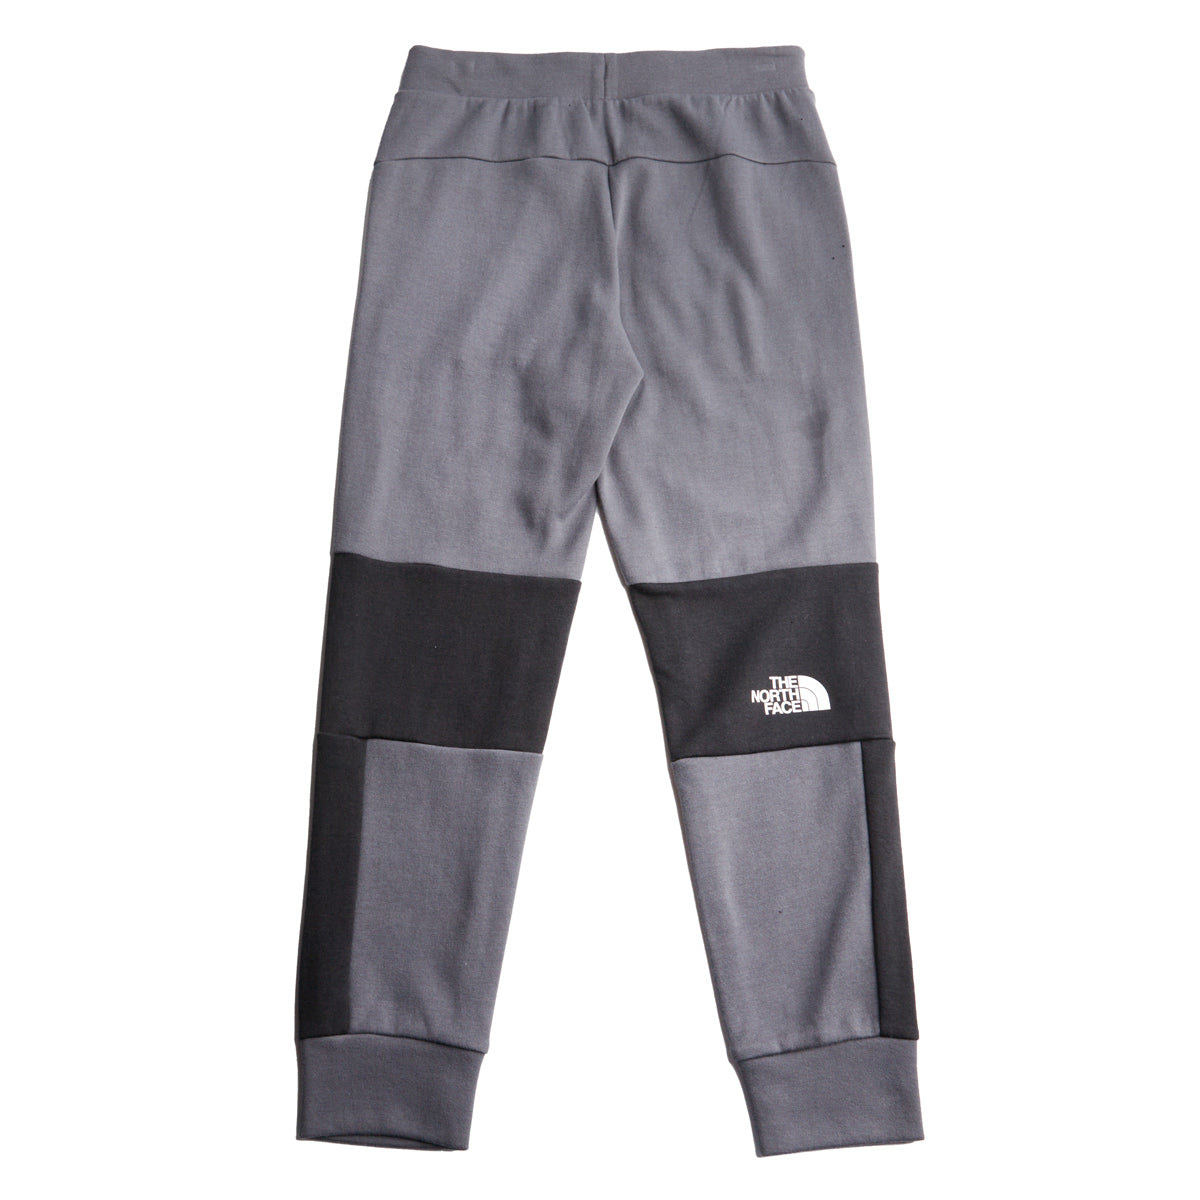 The North Face Boy's Slacker Pant 2 for $29+FS!